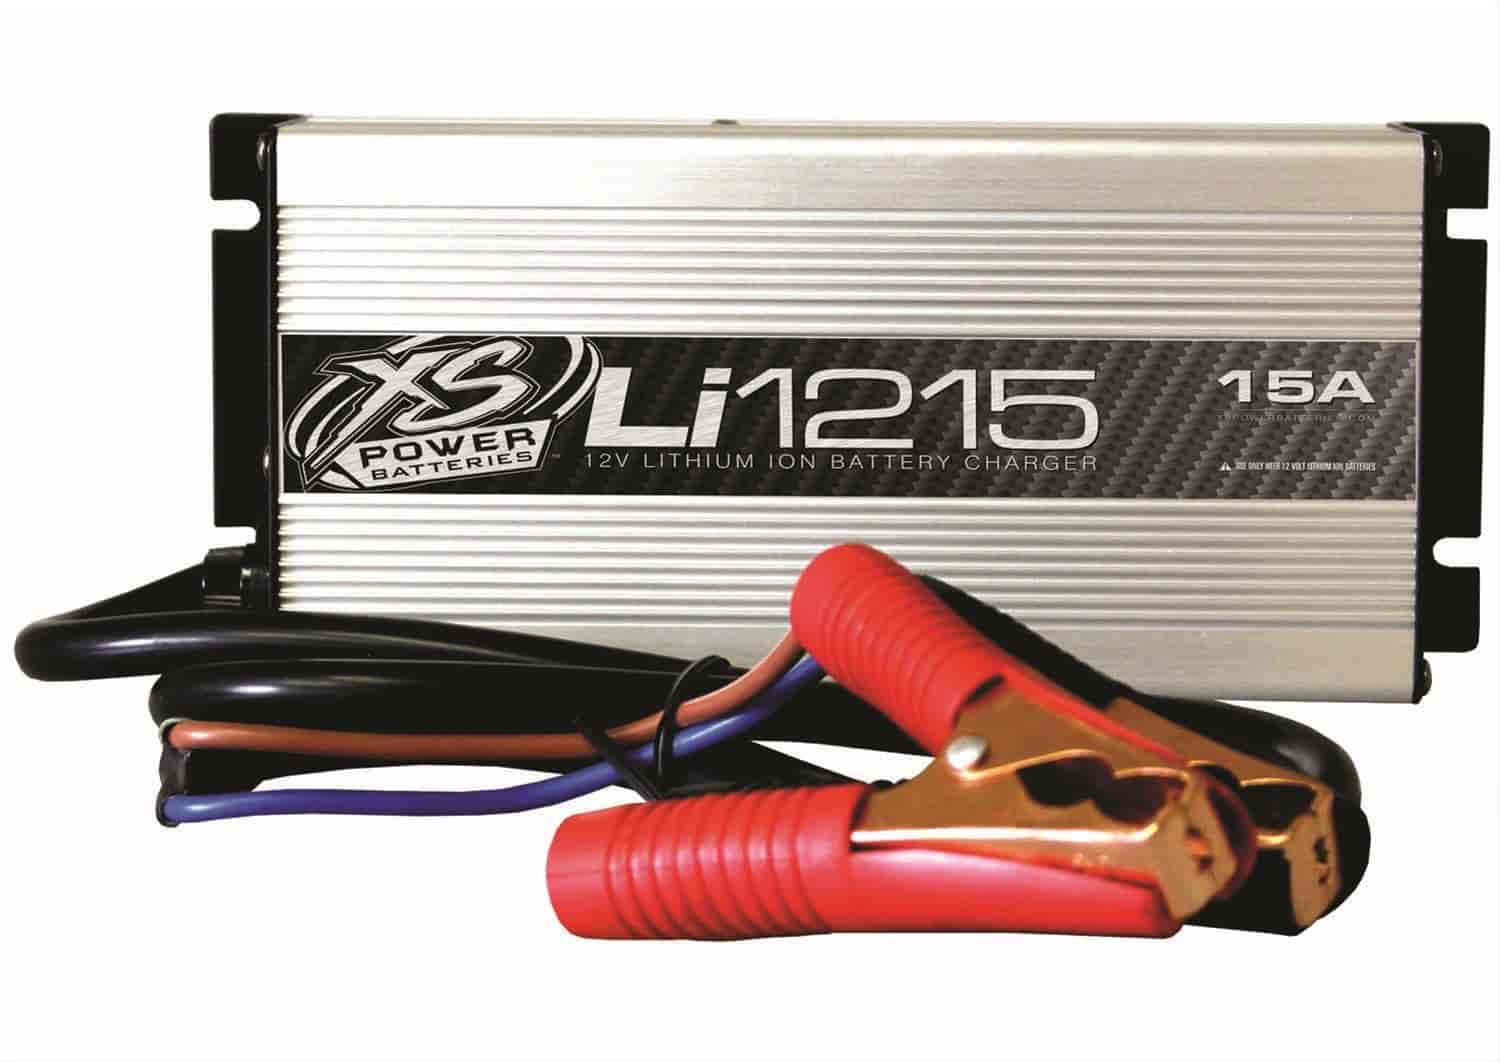 LI1215 12V High-Frequency Lithium Battery IntelliCharger